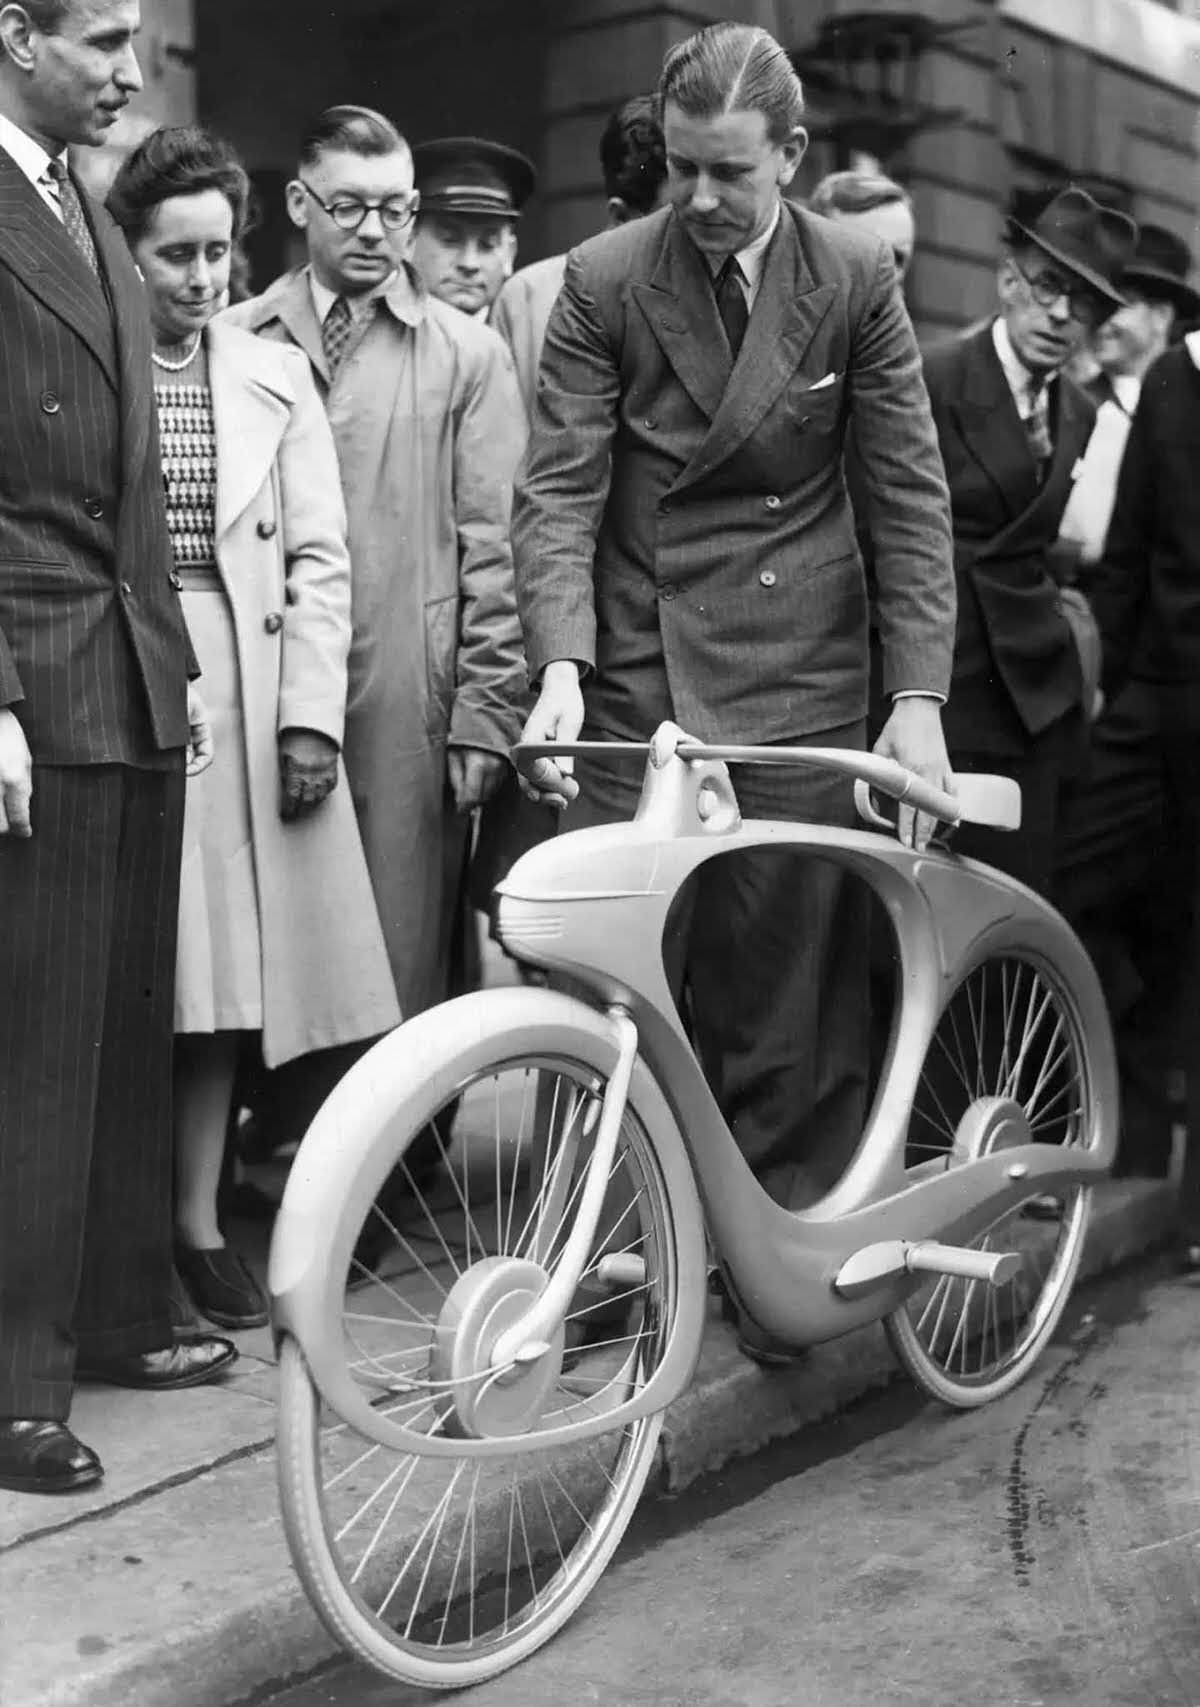 Bowden showing off his bicycle on September 17, 1946